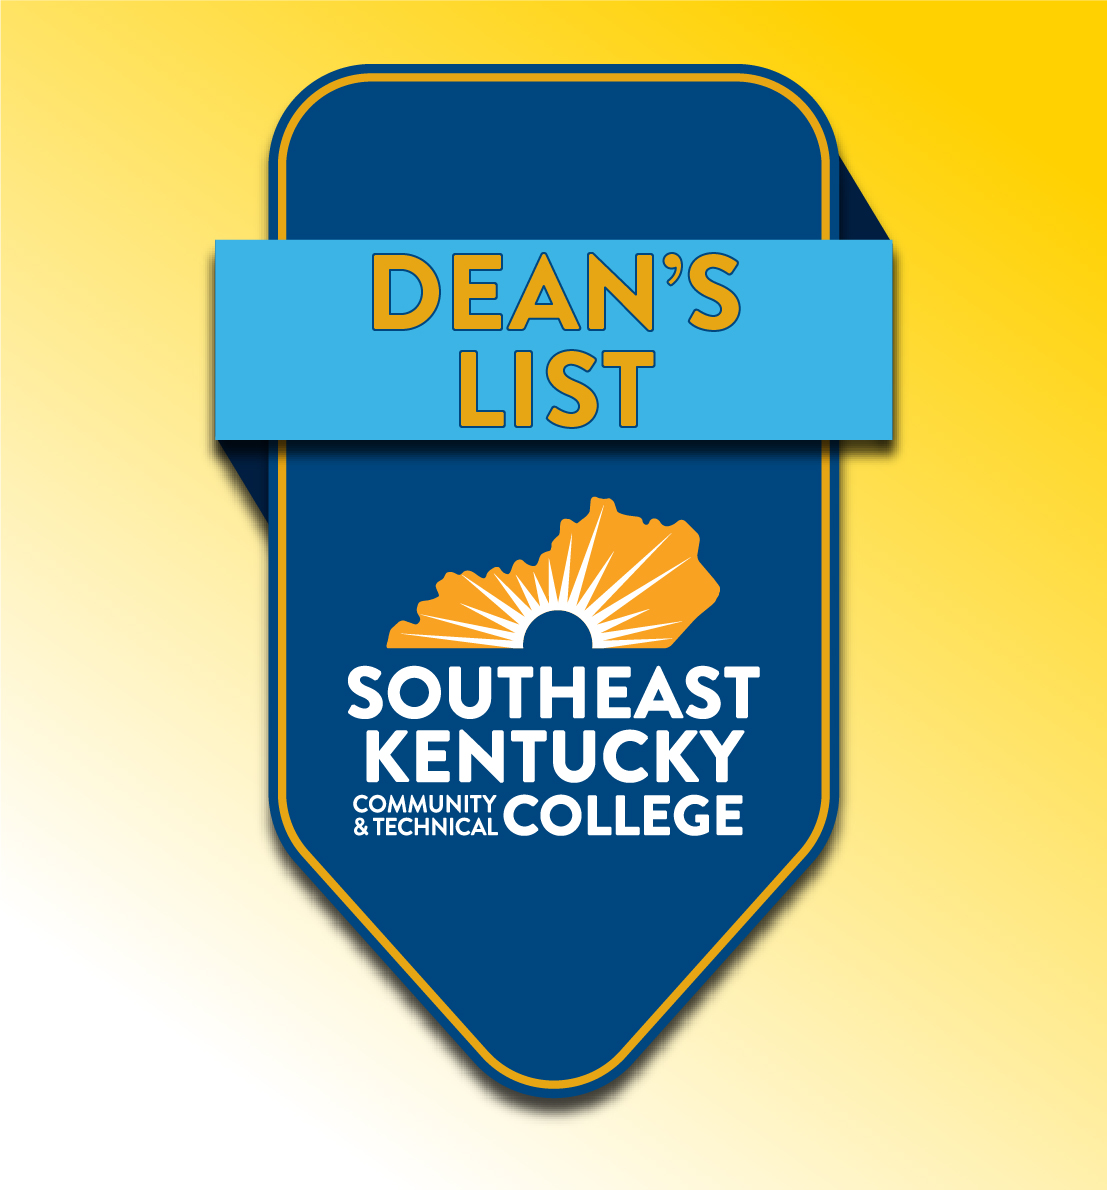 A graphic made to look like a vertical flag, badge, or banner. The background is a fading yellow. The badge says Dean's List and has the SKCTC logo on it.